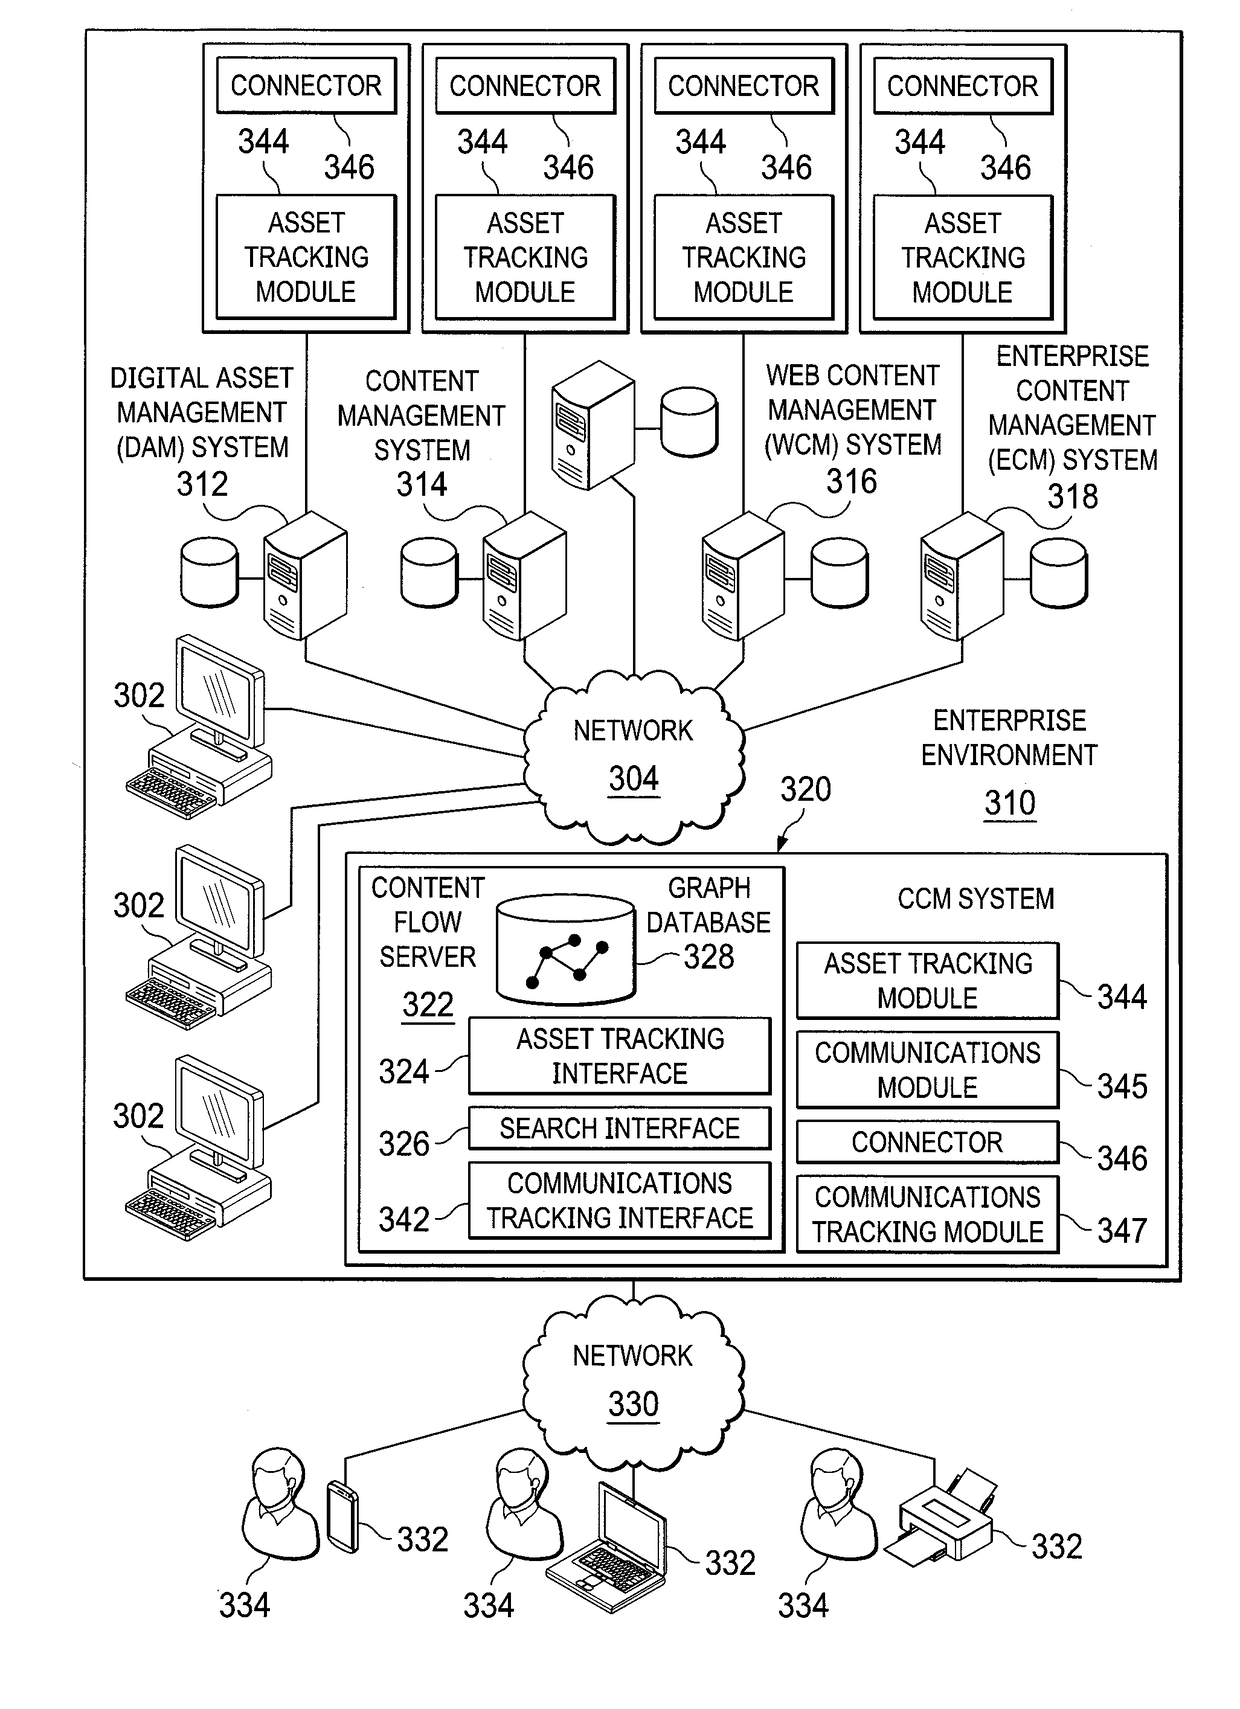 Systems and methods for tracking assets across a distributed network environment